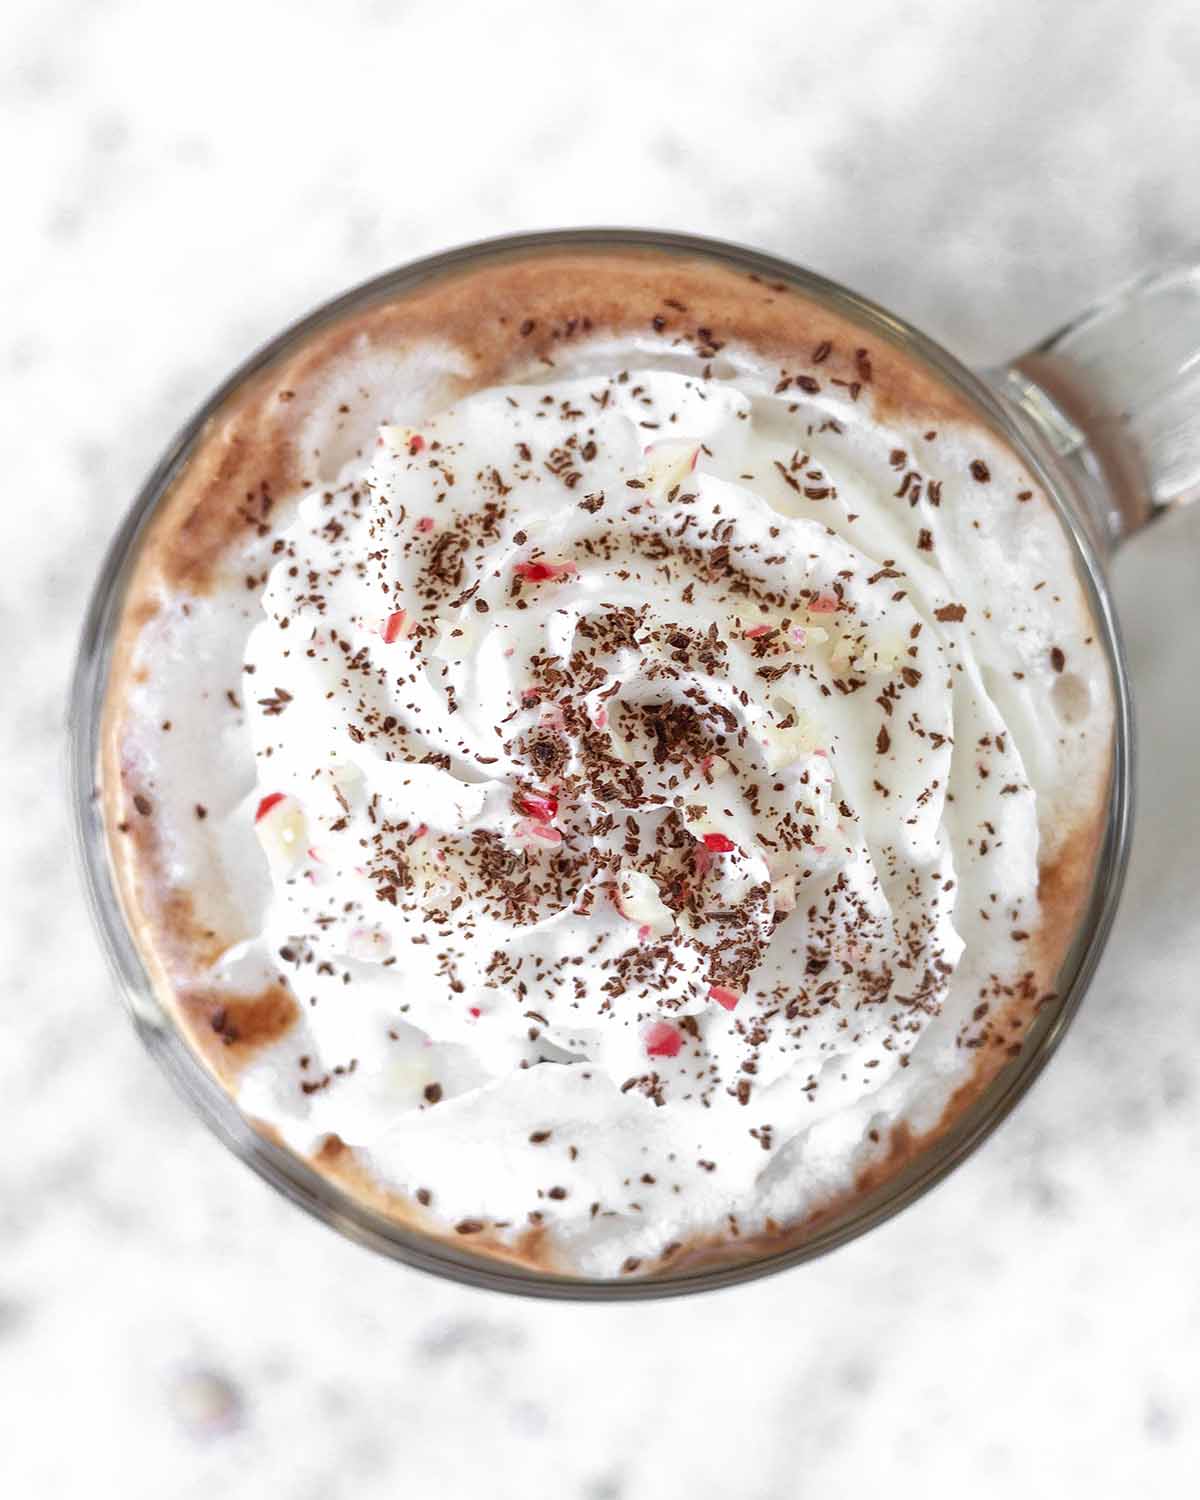 An overhead shot showing the top of a peppermint mocha drink, it’s topped with whipped cream.